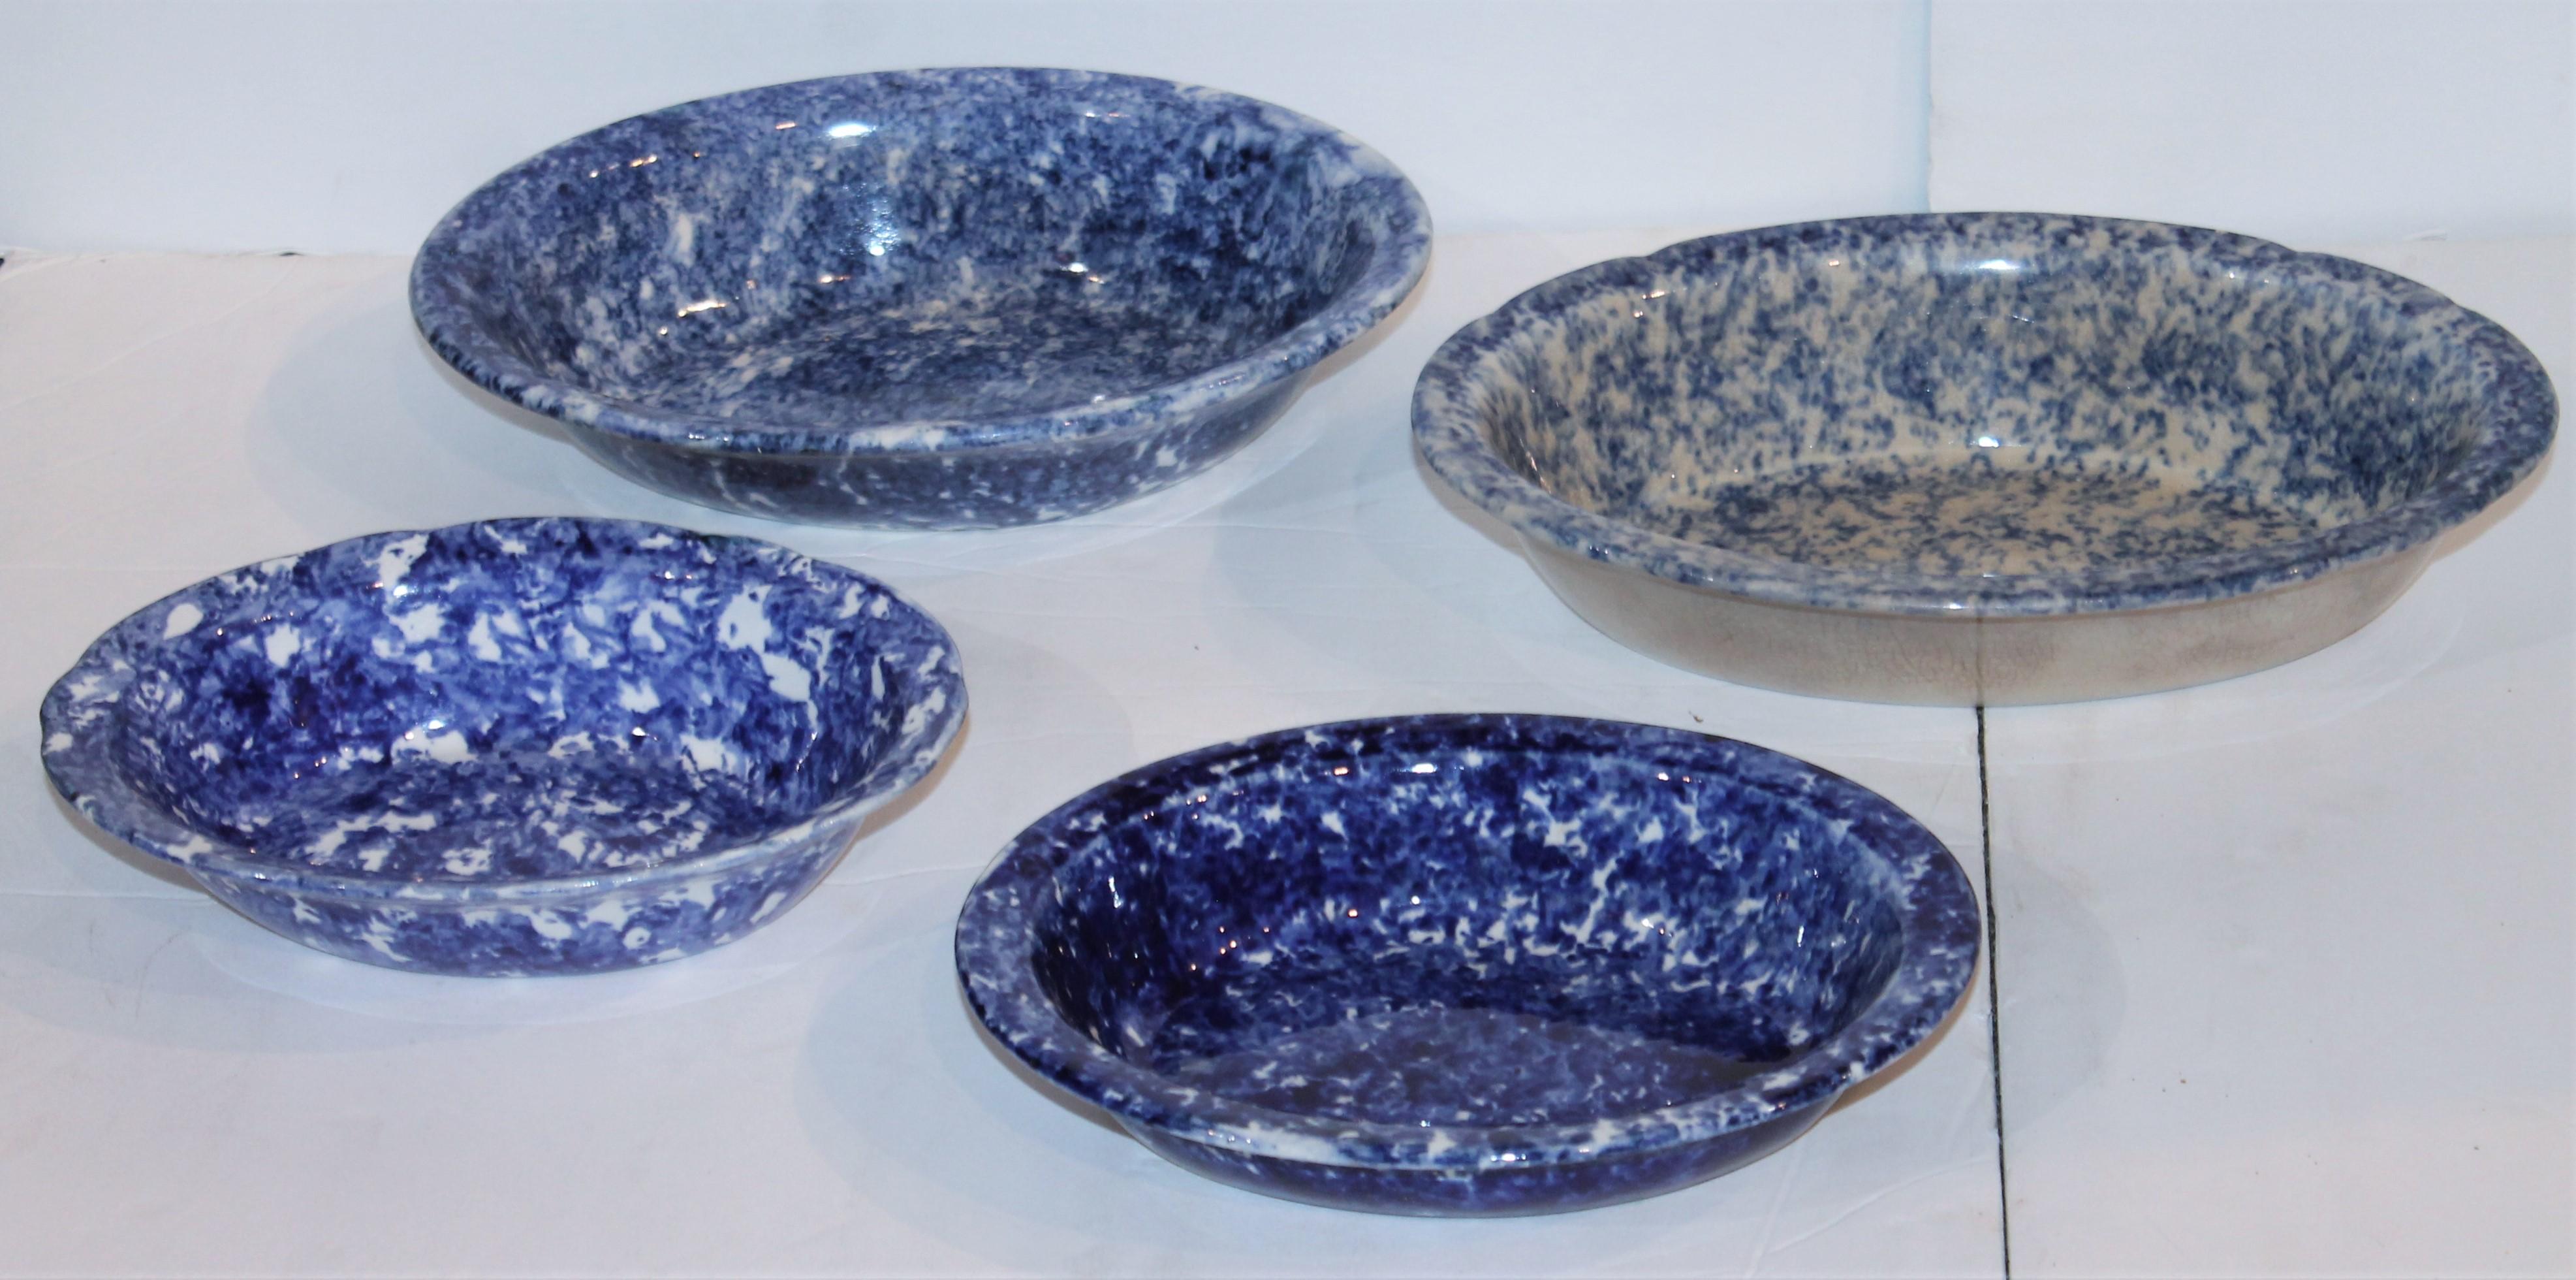 These serving bowls or vegetable bowls are in pristine condition and selling as a group four bowls. The bowls have old crazing and are all in fine condition.
Measures: 6 x 8 -3
7 x 10-1.